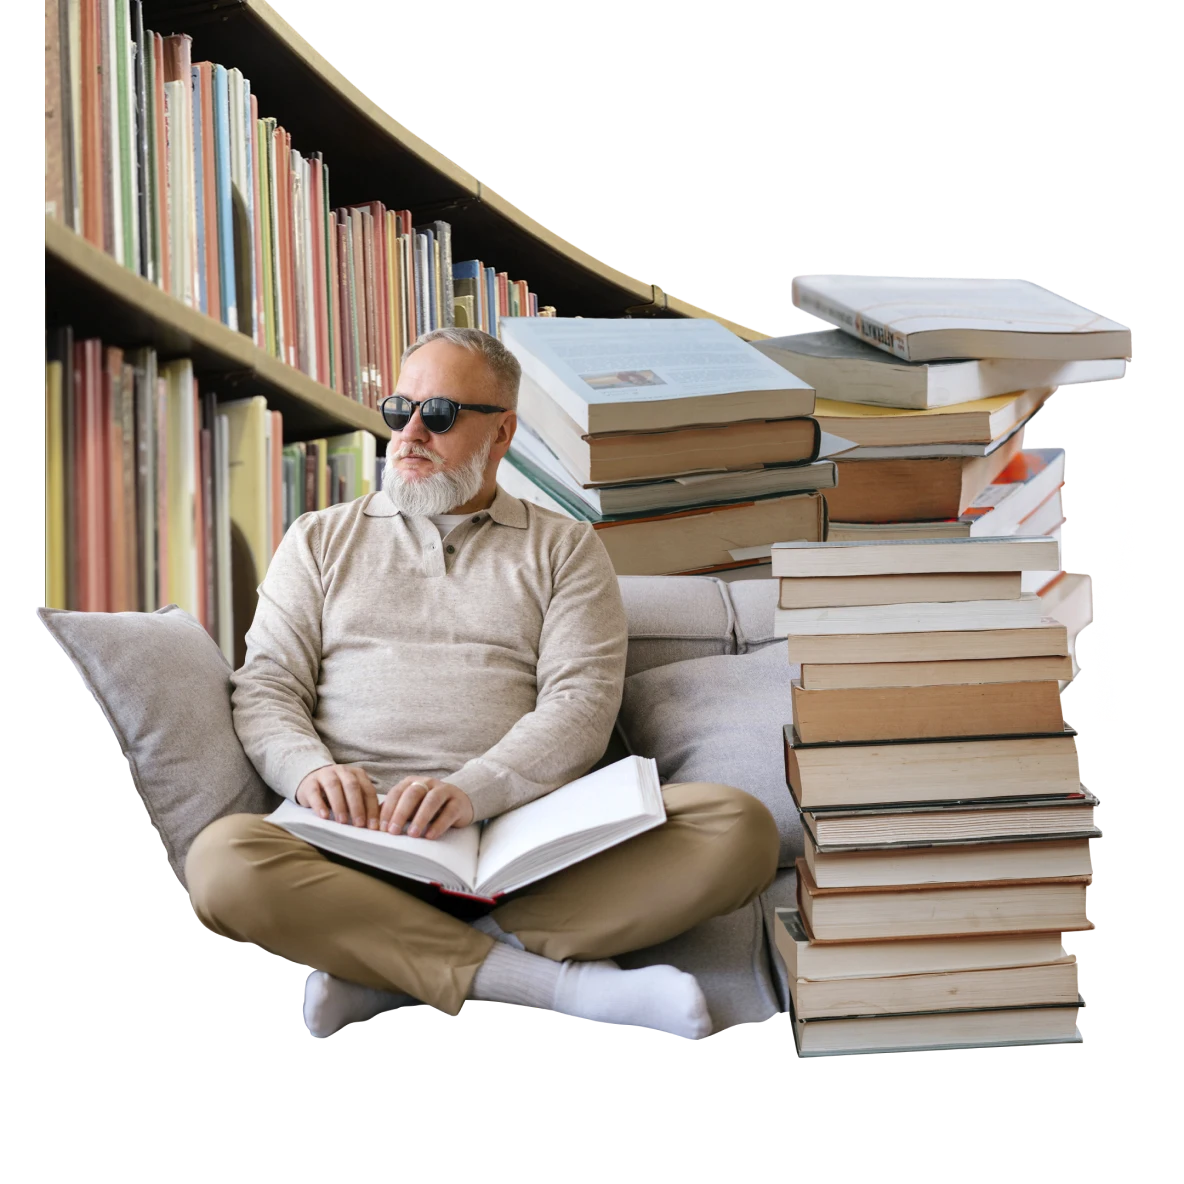 Vision-impaired white man wears sunglasses, sits cross-legged reading braille. He’s surrounded by stacks of books and a library book shelf.